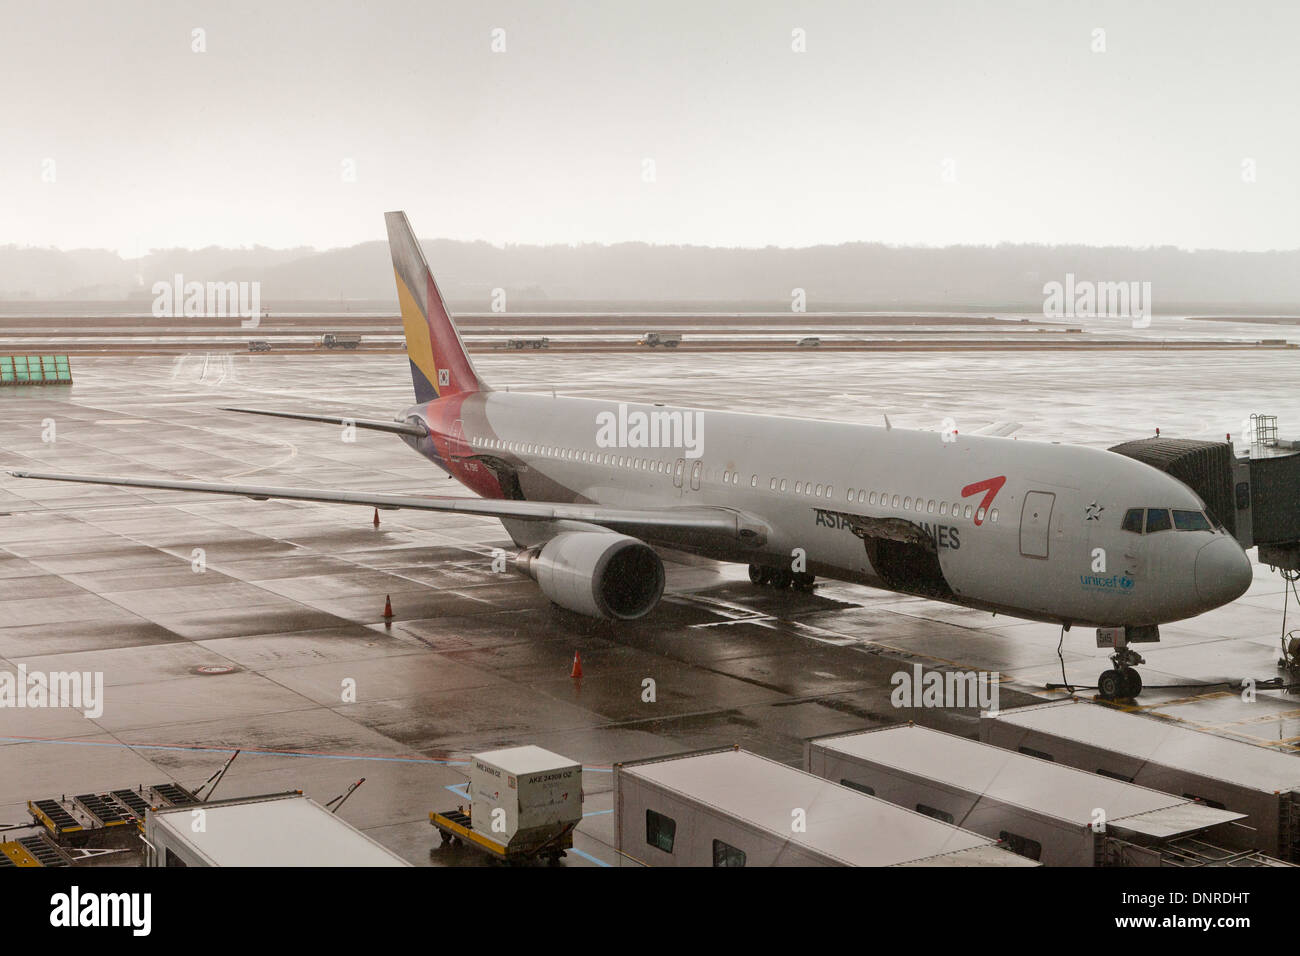 Asiana Boeing 707 plane docked in rainy weather at Incheon International Airport - South Korea Stock Photo